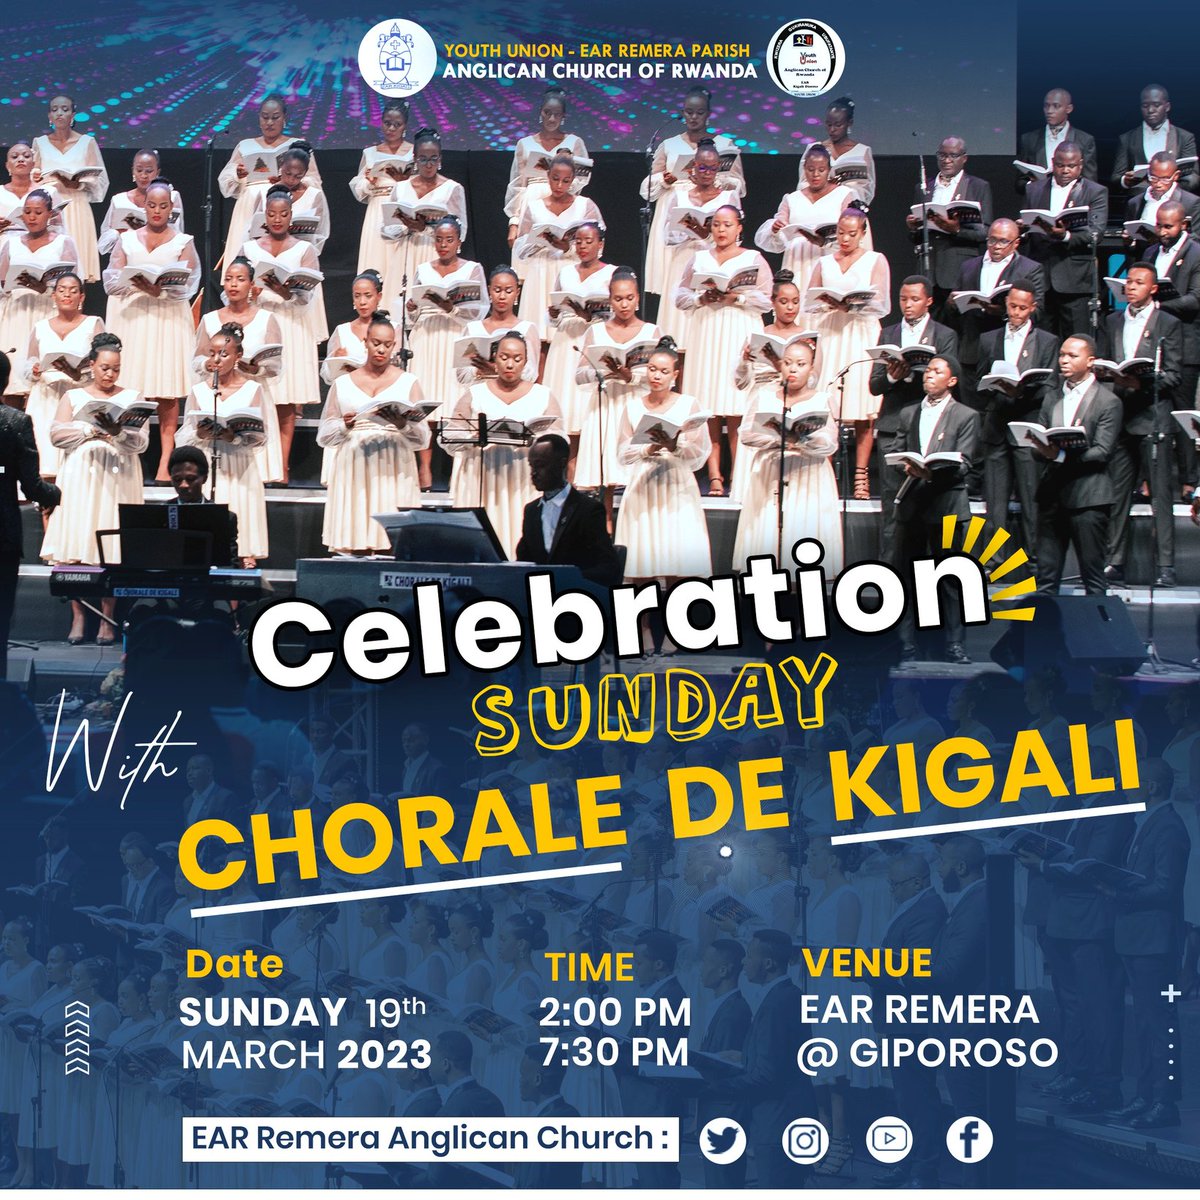 CELEBRATION SUNDAY with CHORALE DE KIGALI

DON'T MISS Next Sunday, Mar 19, 2023 @ 2pm-6:30pm, the blessed most Classic choir will minister with us. 

Y'all Invited with friends and families @ear_remera Giporoso 

@ChoraledeKigali